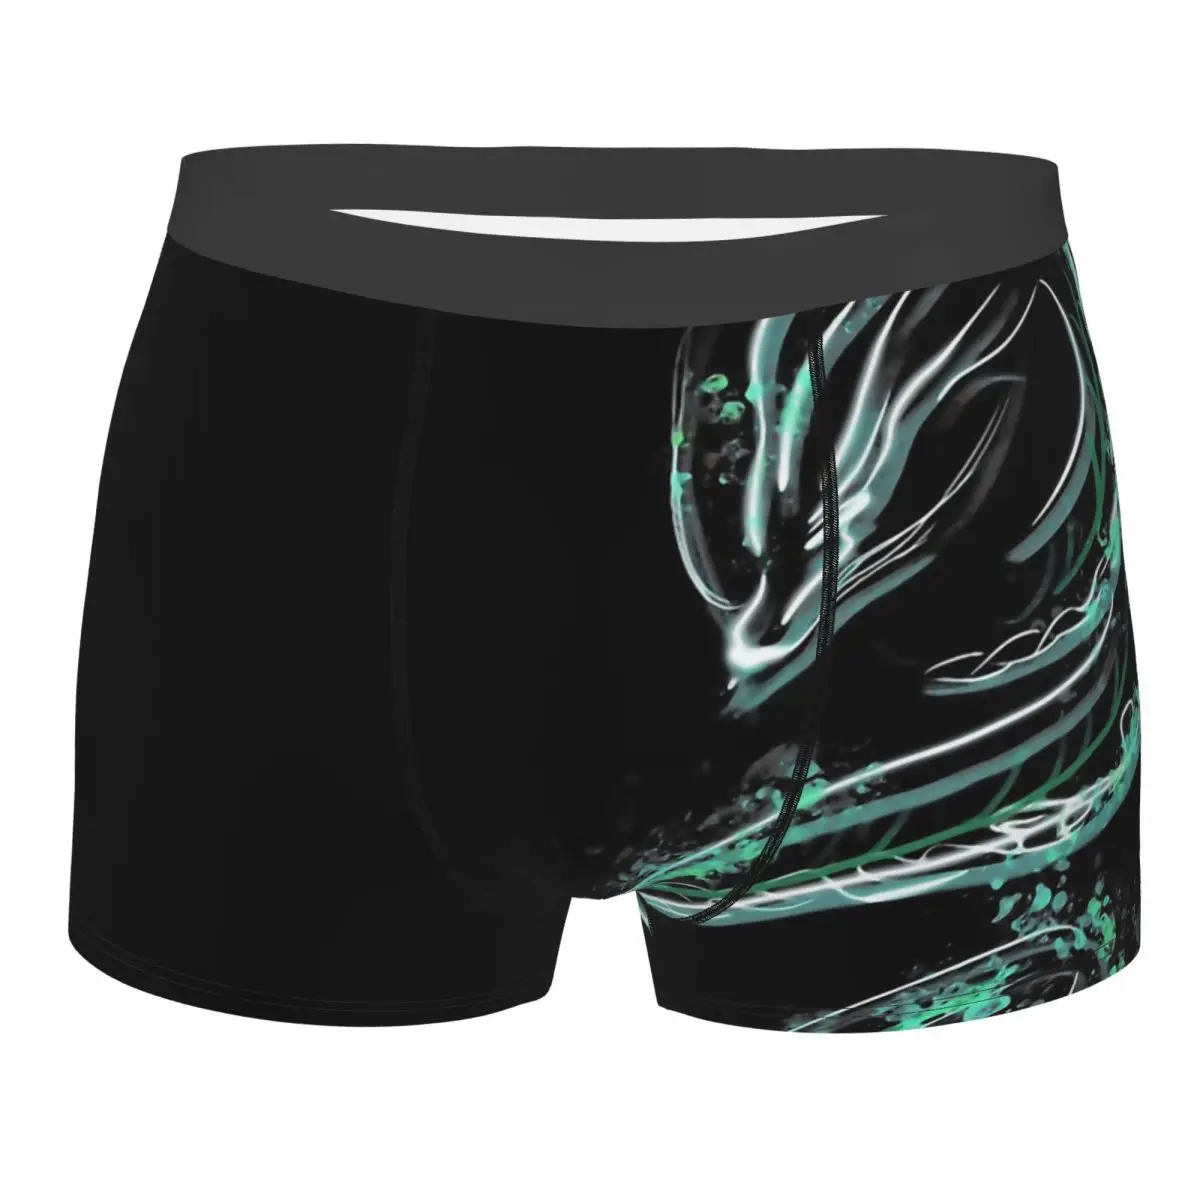 

Green Akali Dragon Man's Boxer Briefs League of Legends Game Highly Breathable Underpants High Quality Print Shorts Gift Idea